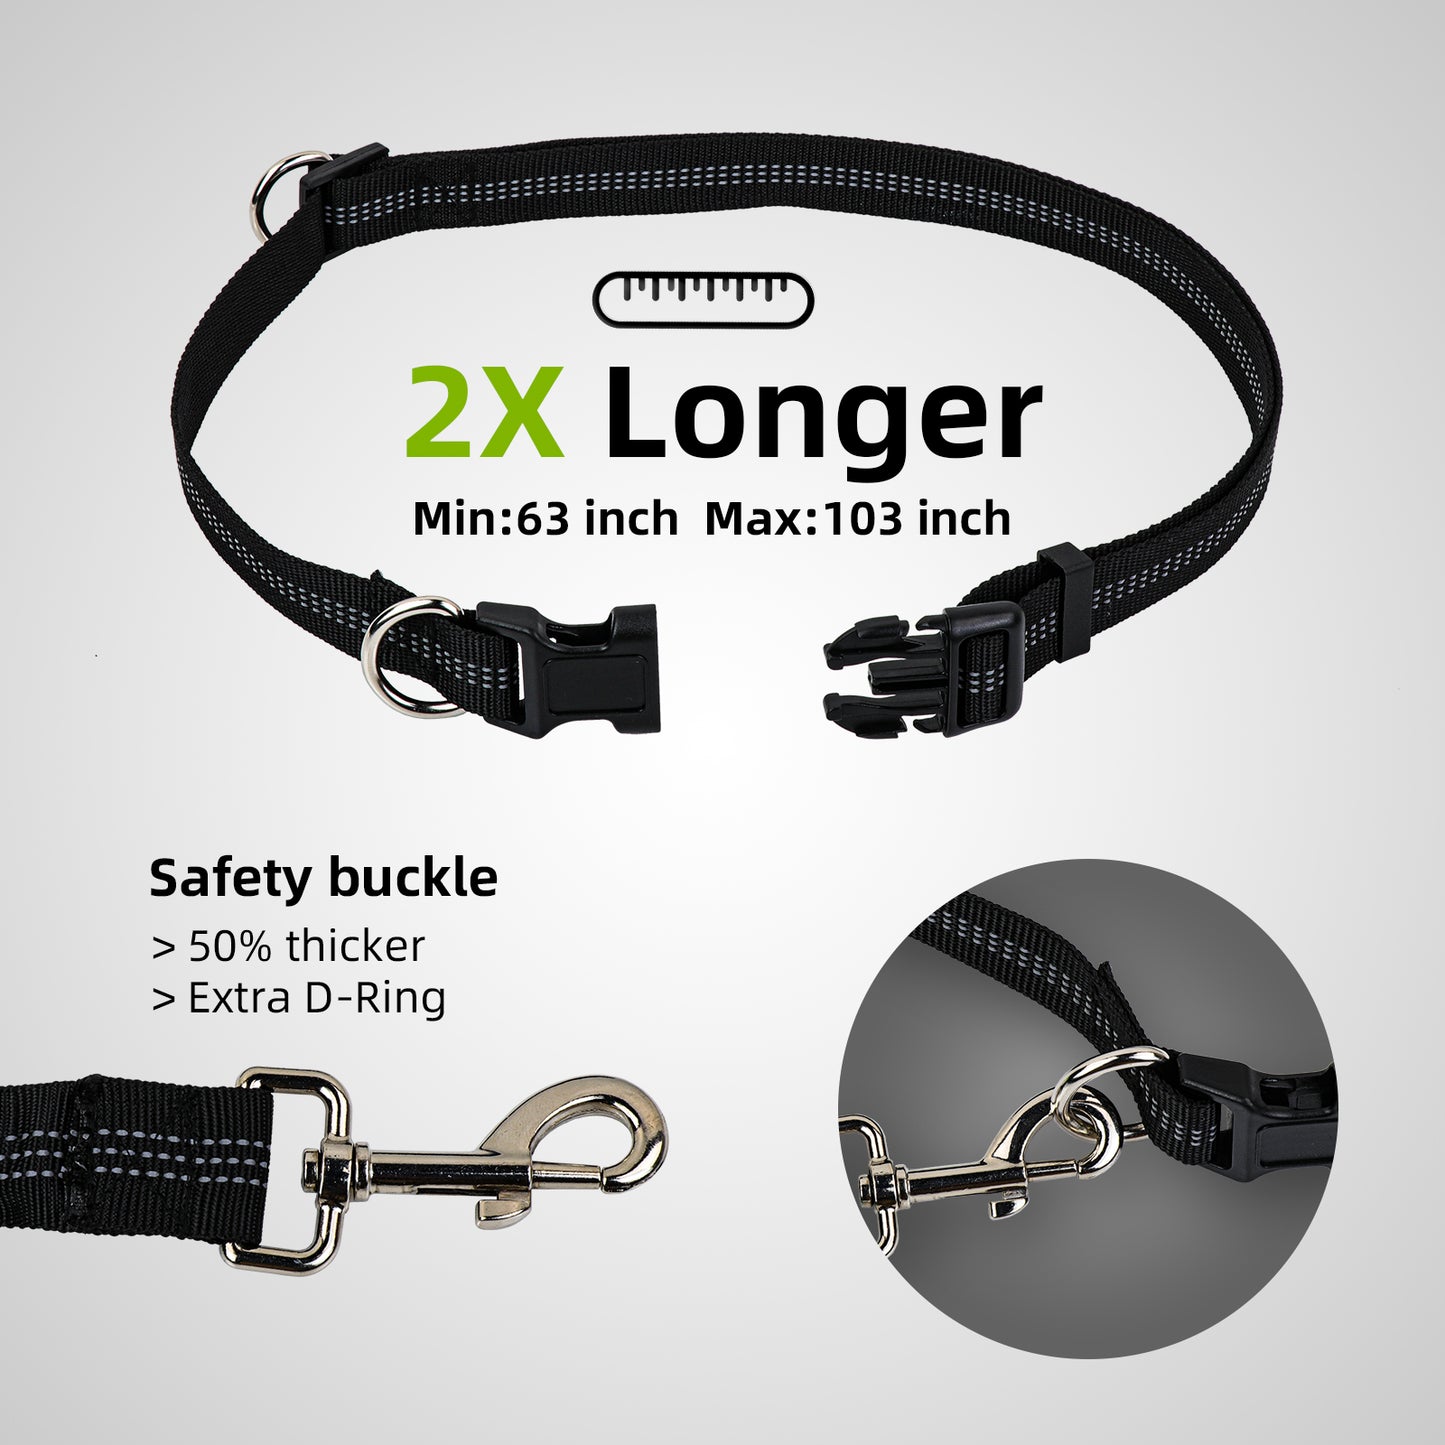 Hands Free Dog Leash for Running Jogging Walking with Zipper Pouch, Retractable Bungee Dog Leash Belt with Dual Padded Handles for Large/Medium Dogs, Adjustable Waist Belt